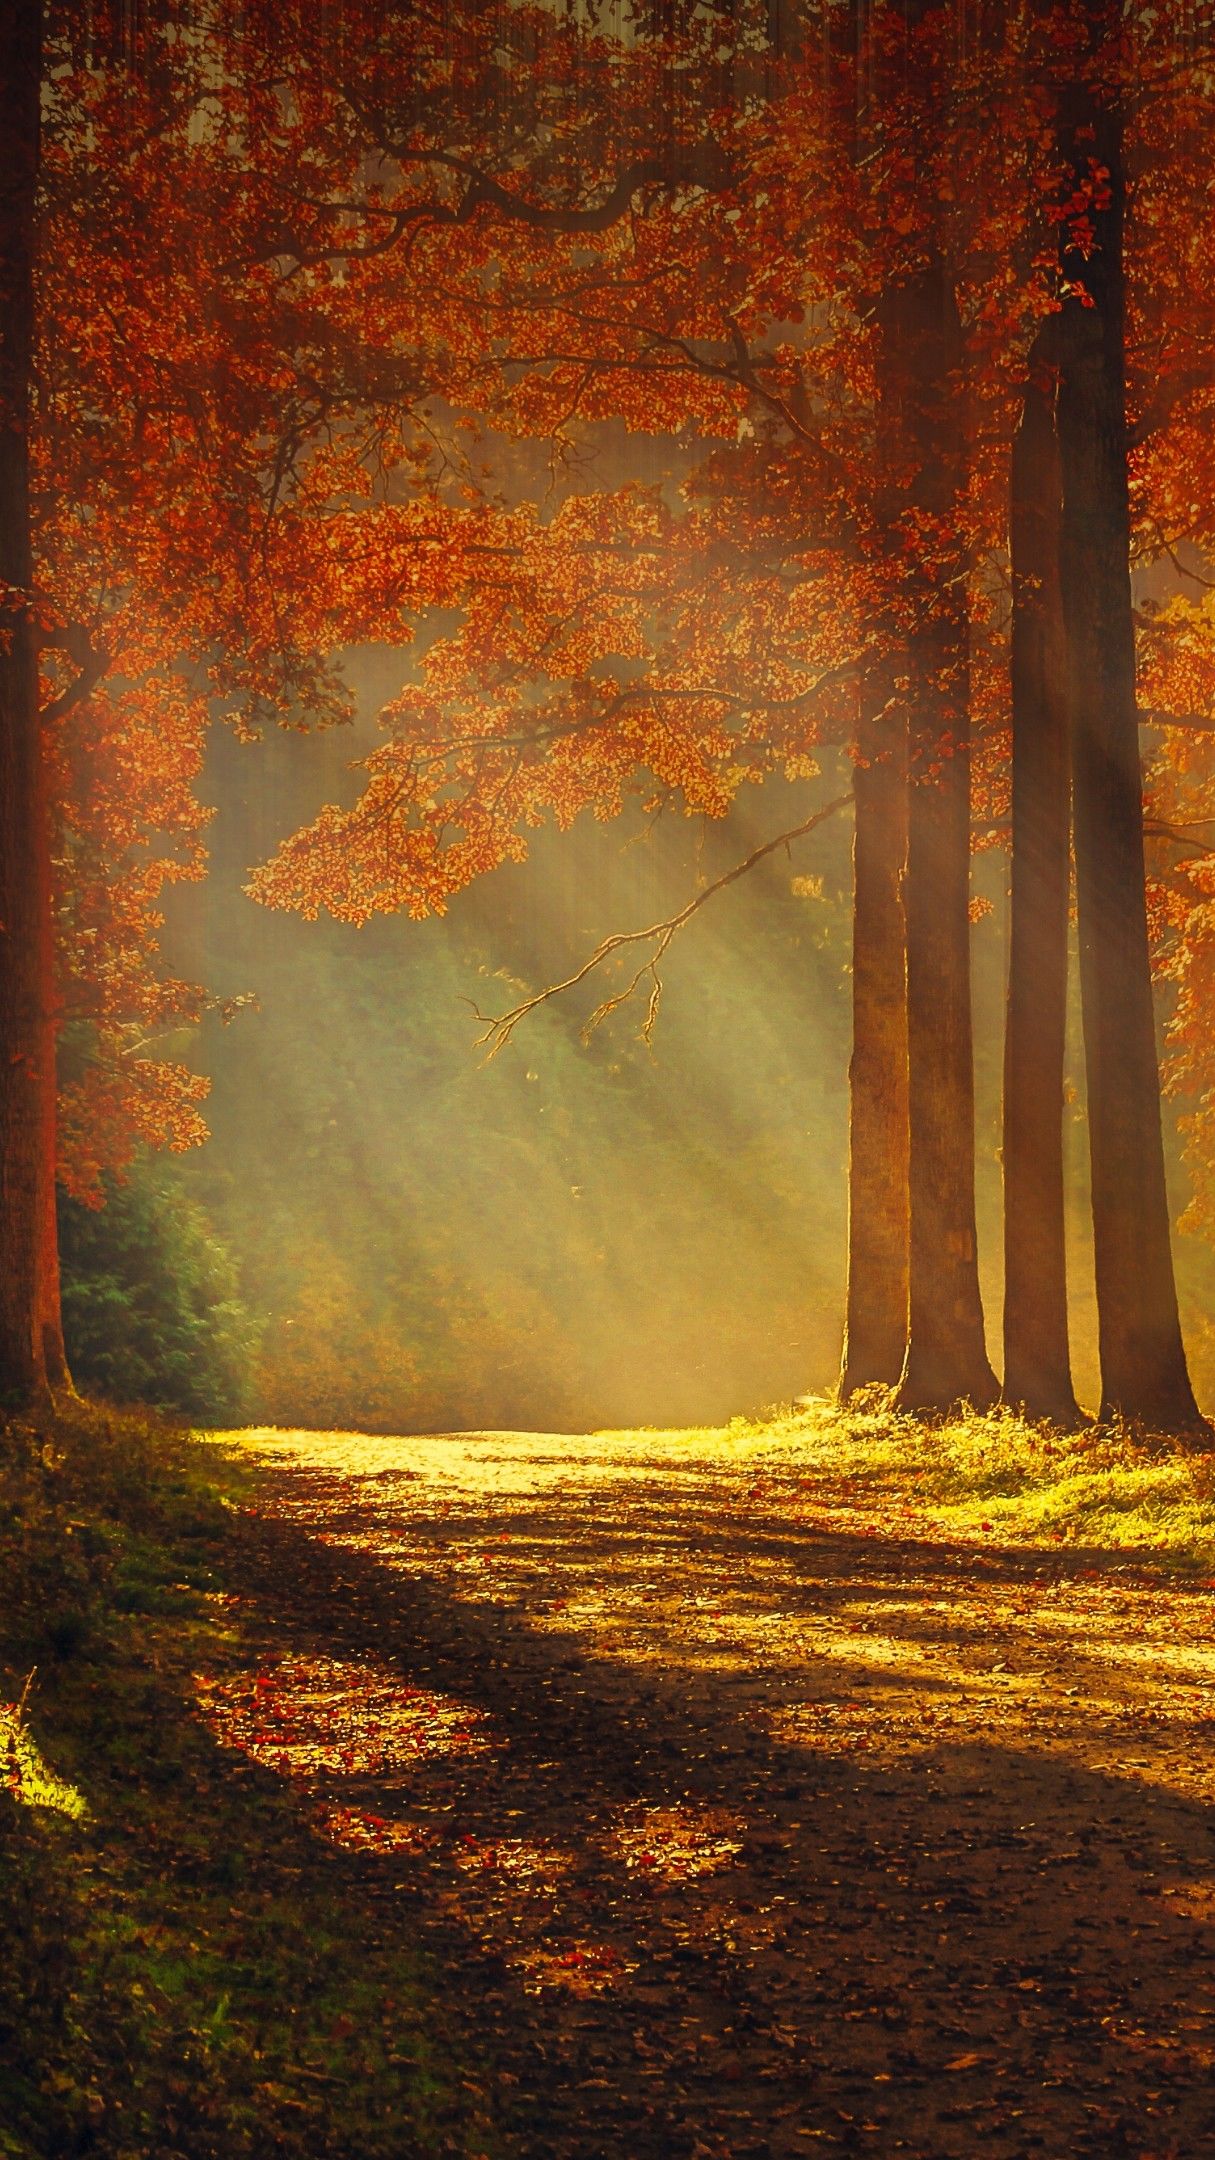 Sunlight through the autumn forest - backiee